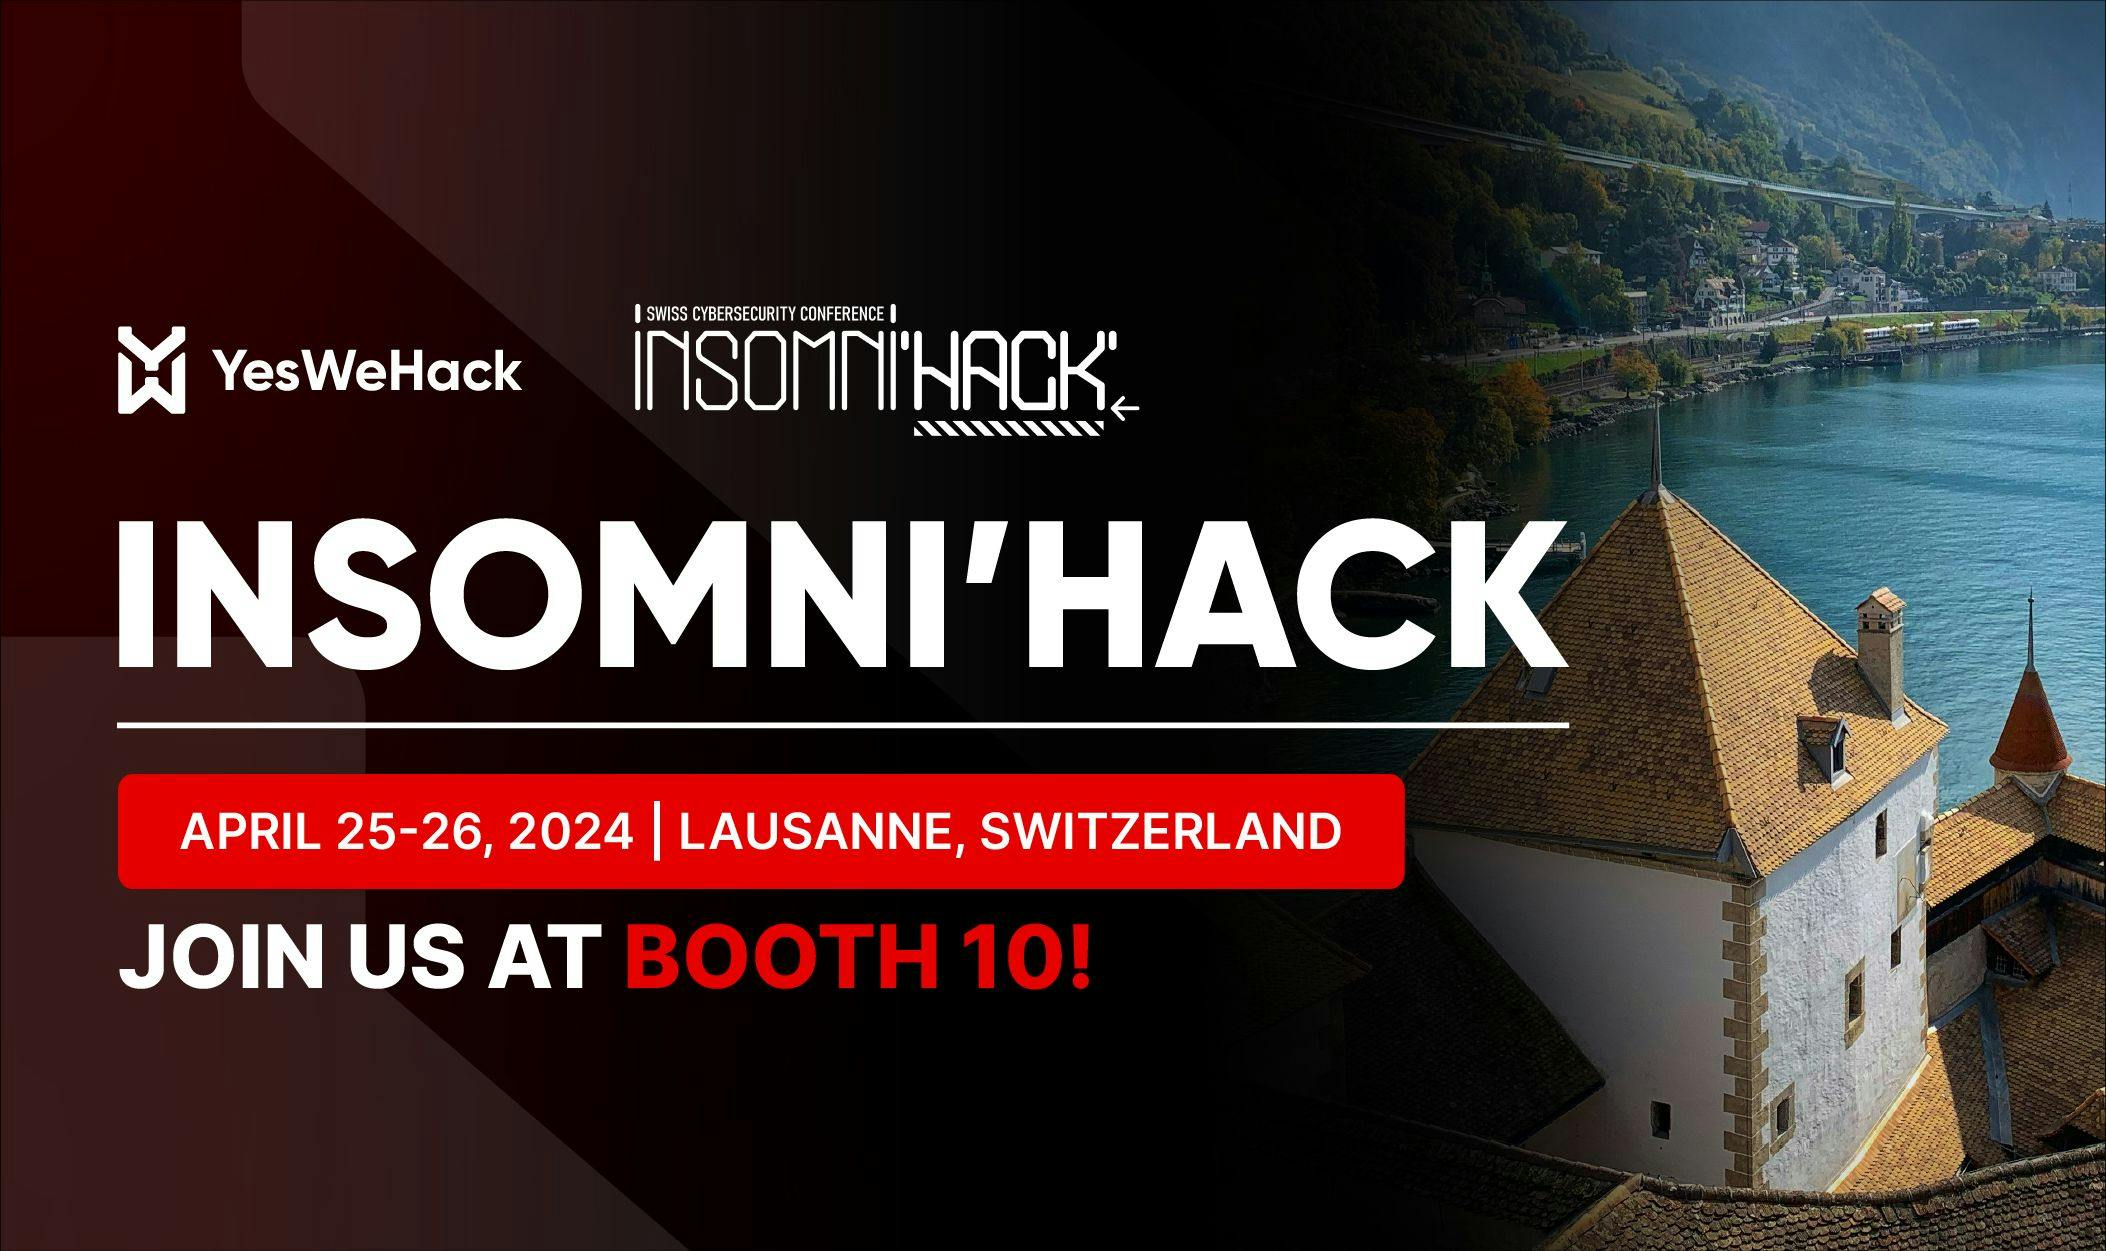 Join YesWeHack at Insomni'hack in Lausanne on April 25-26.